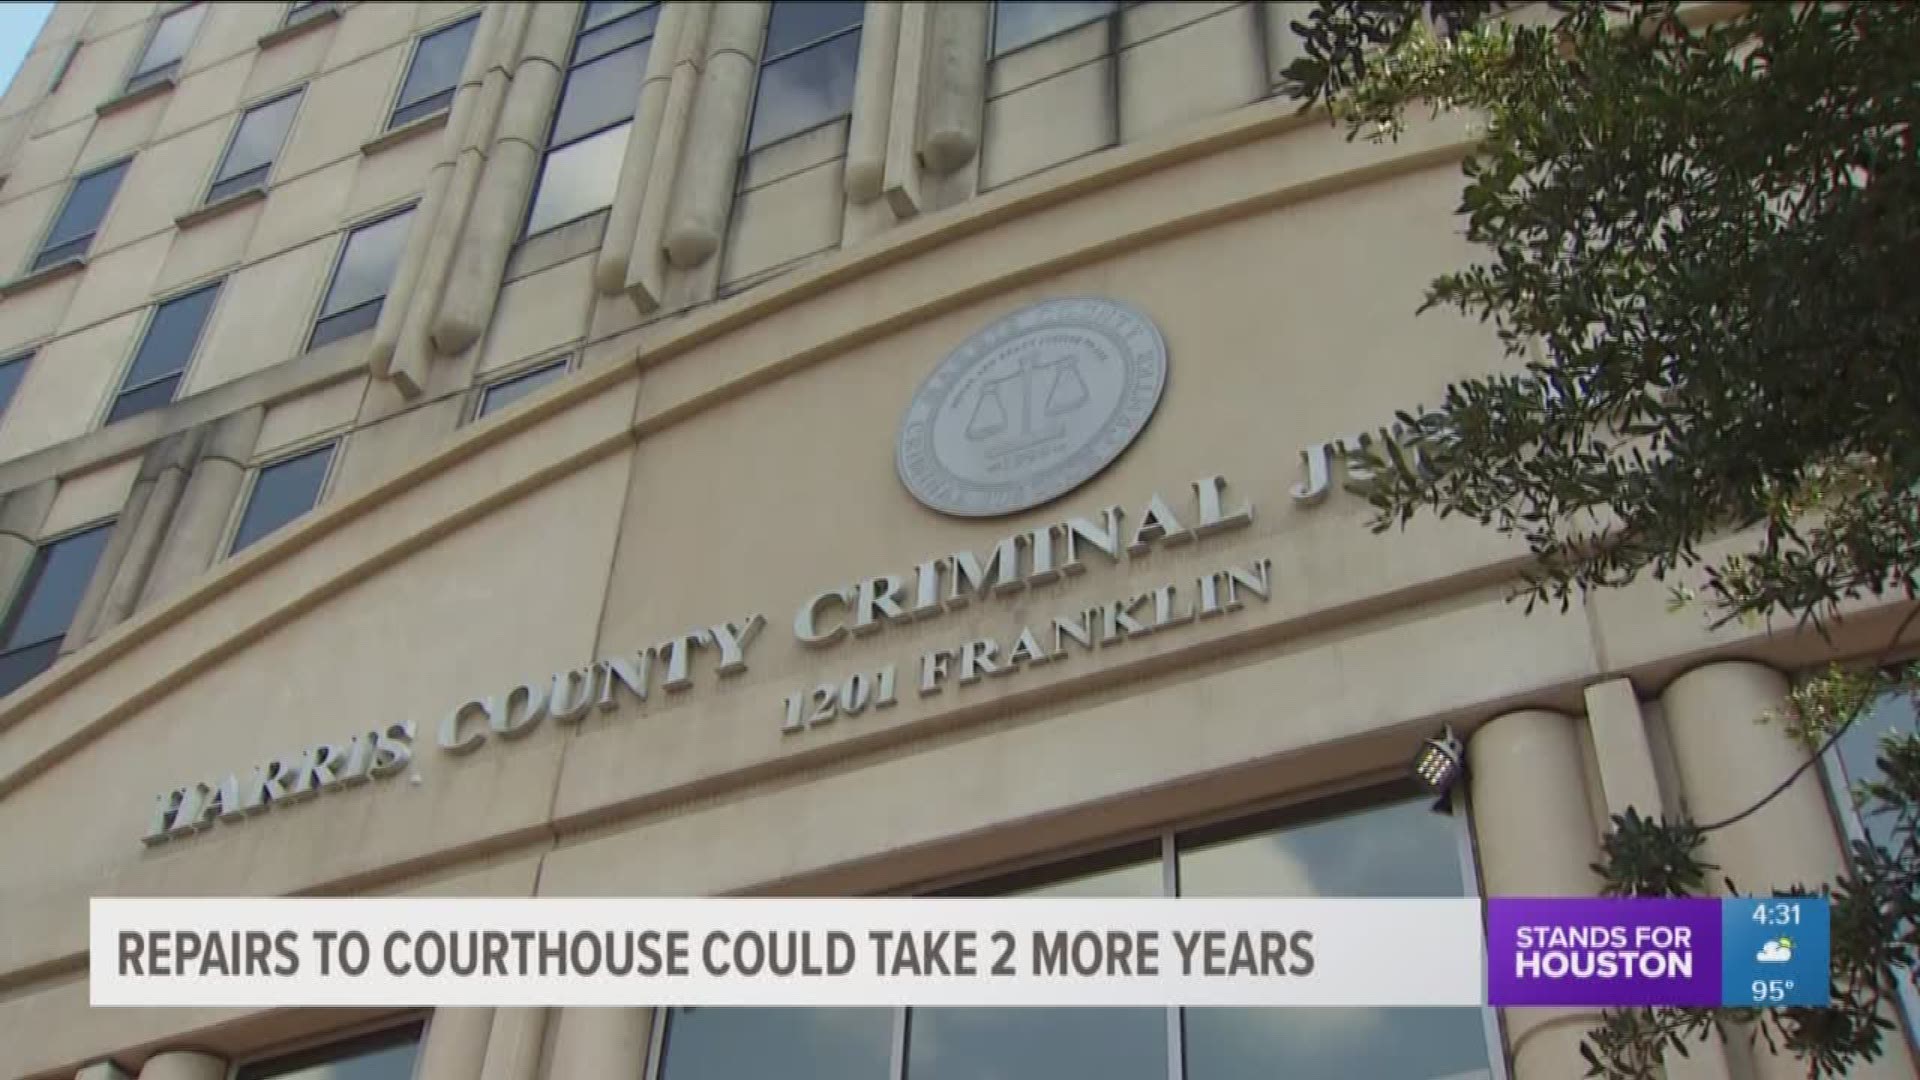 County officials tell KHOU 11 News that it will be 2020 until repairs are complete at the Harris County CJC. 